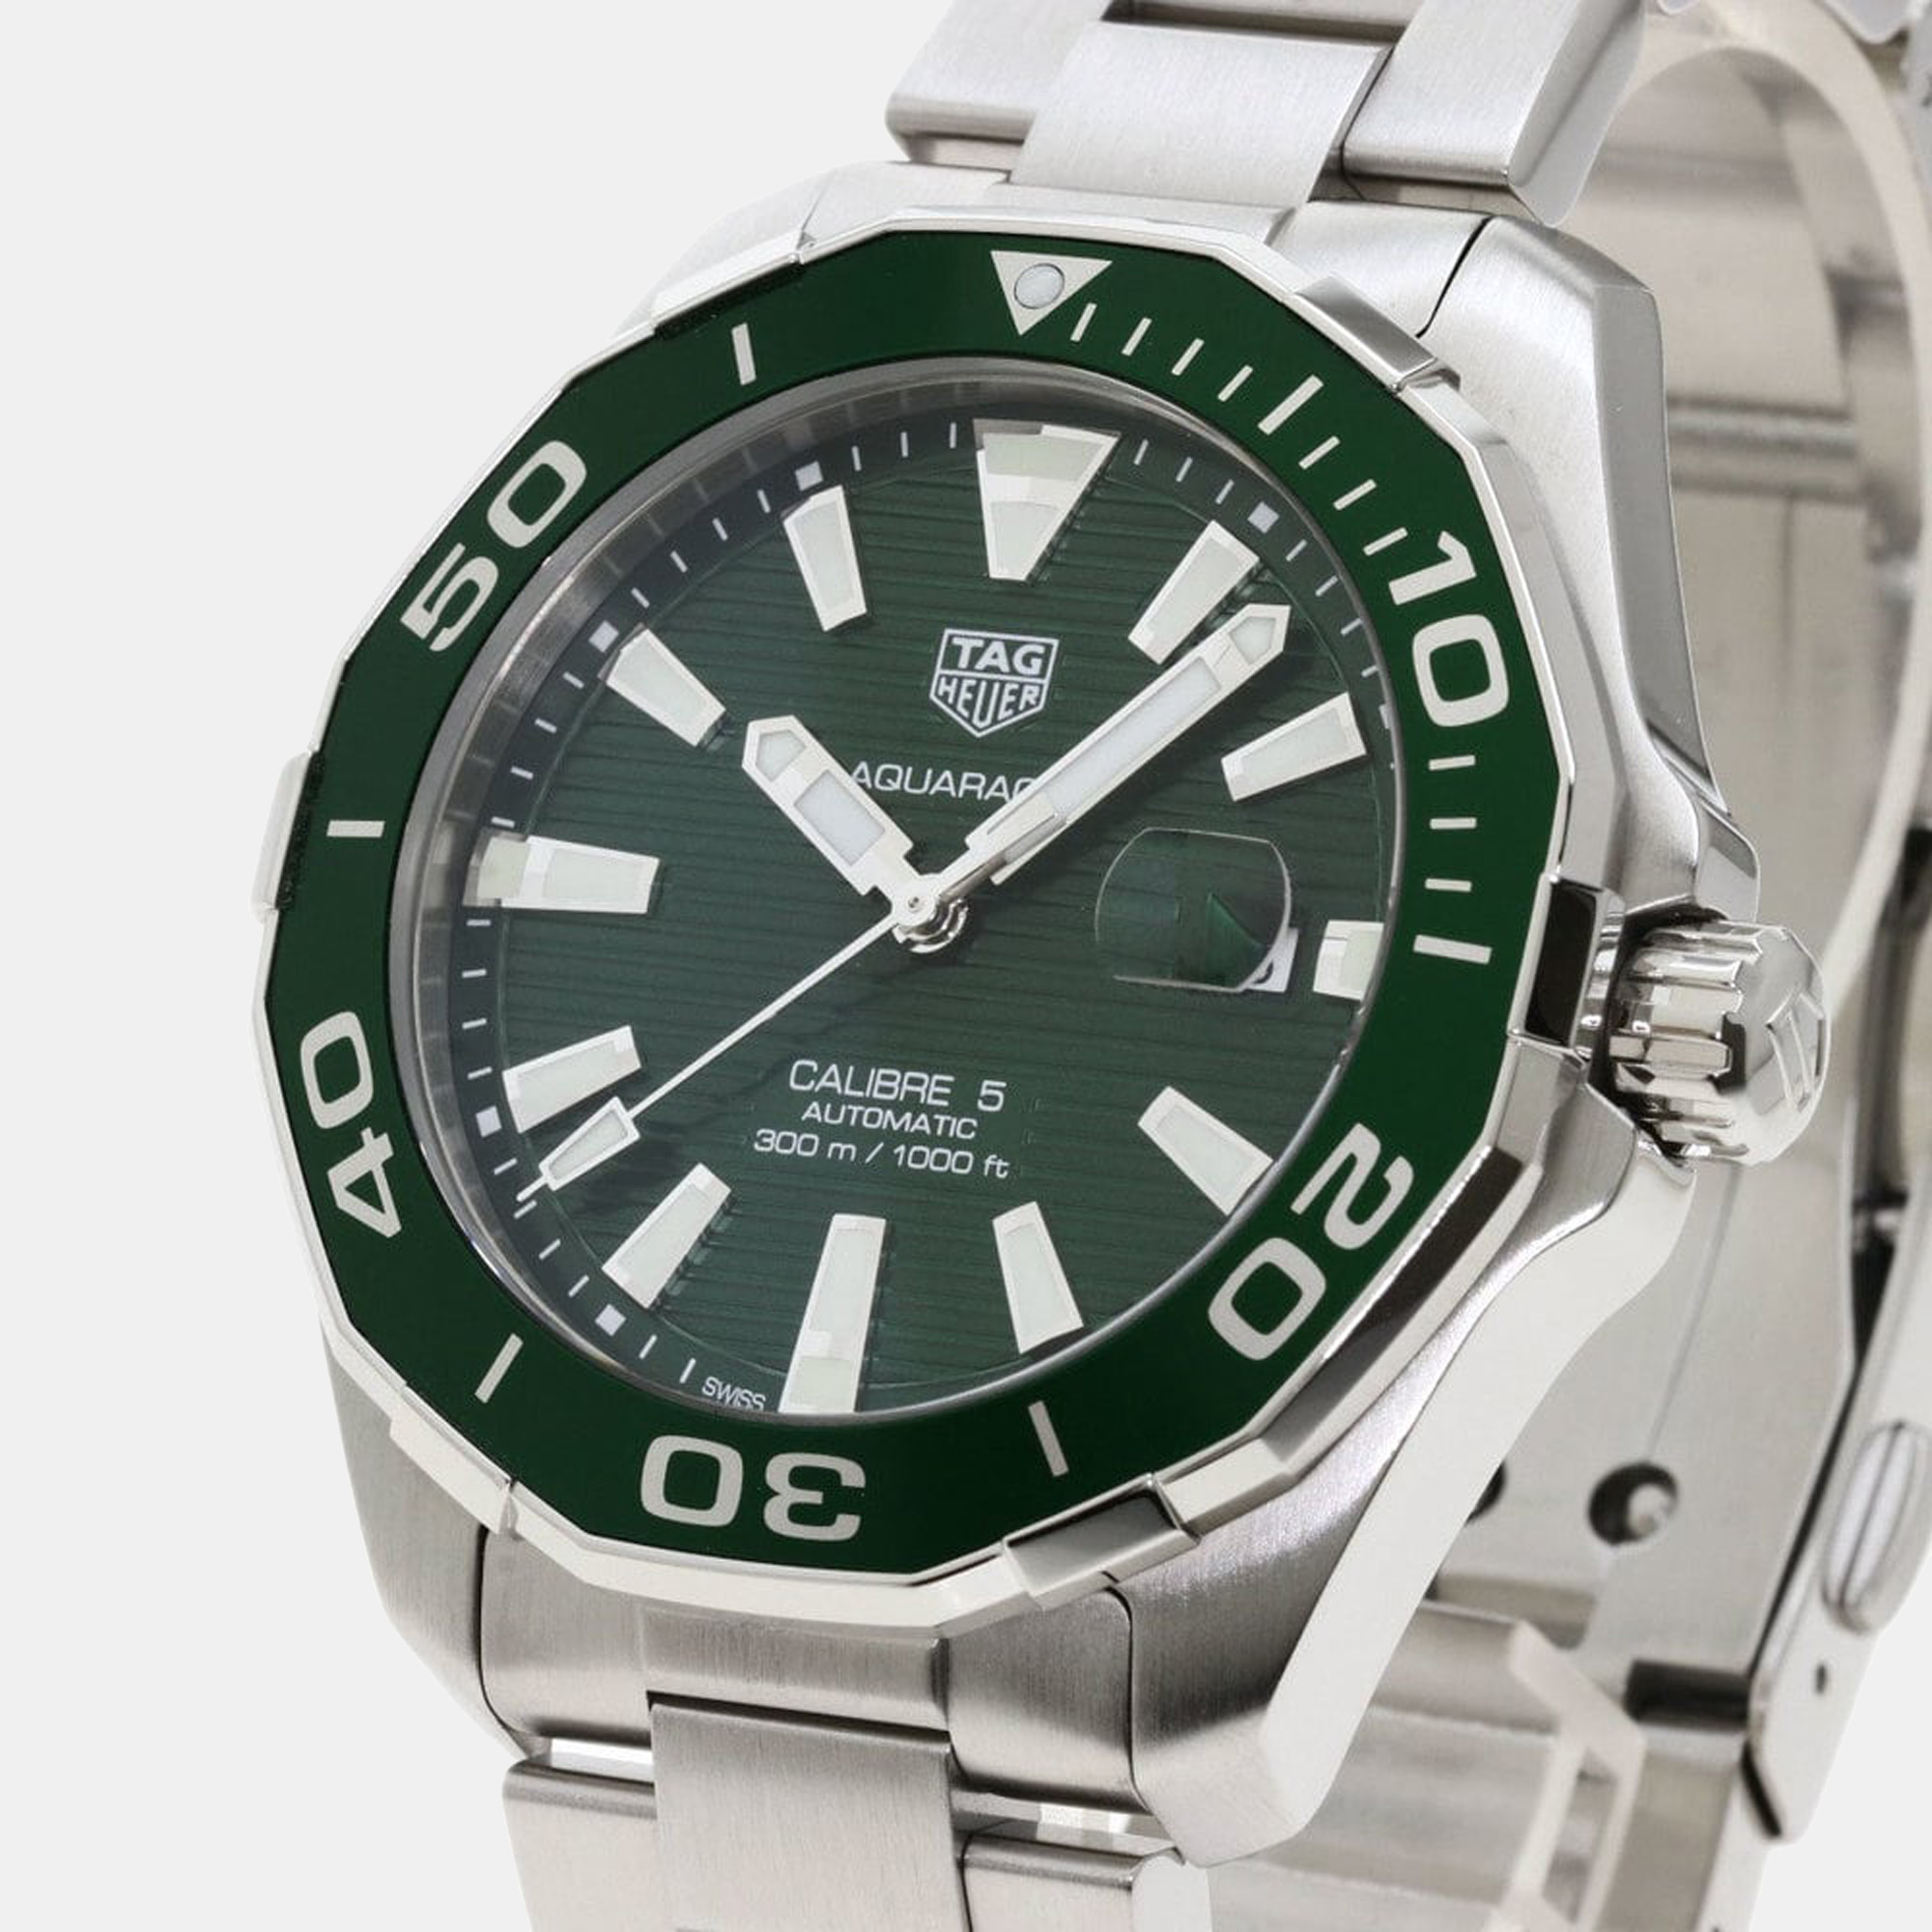 

Tag Heuer Green Stainless Steel Aquaracer Calibre 5 WAY201S Men's Wristwatch 45 mm